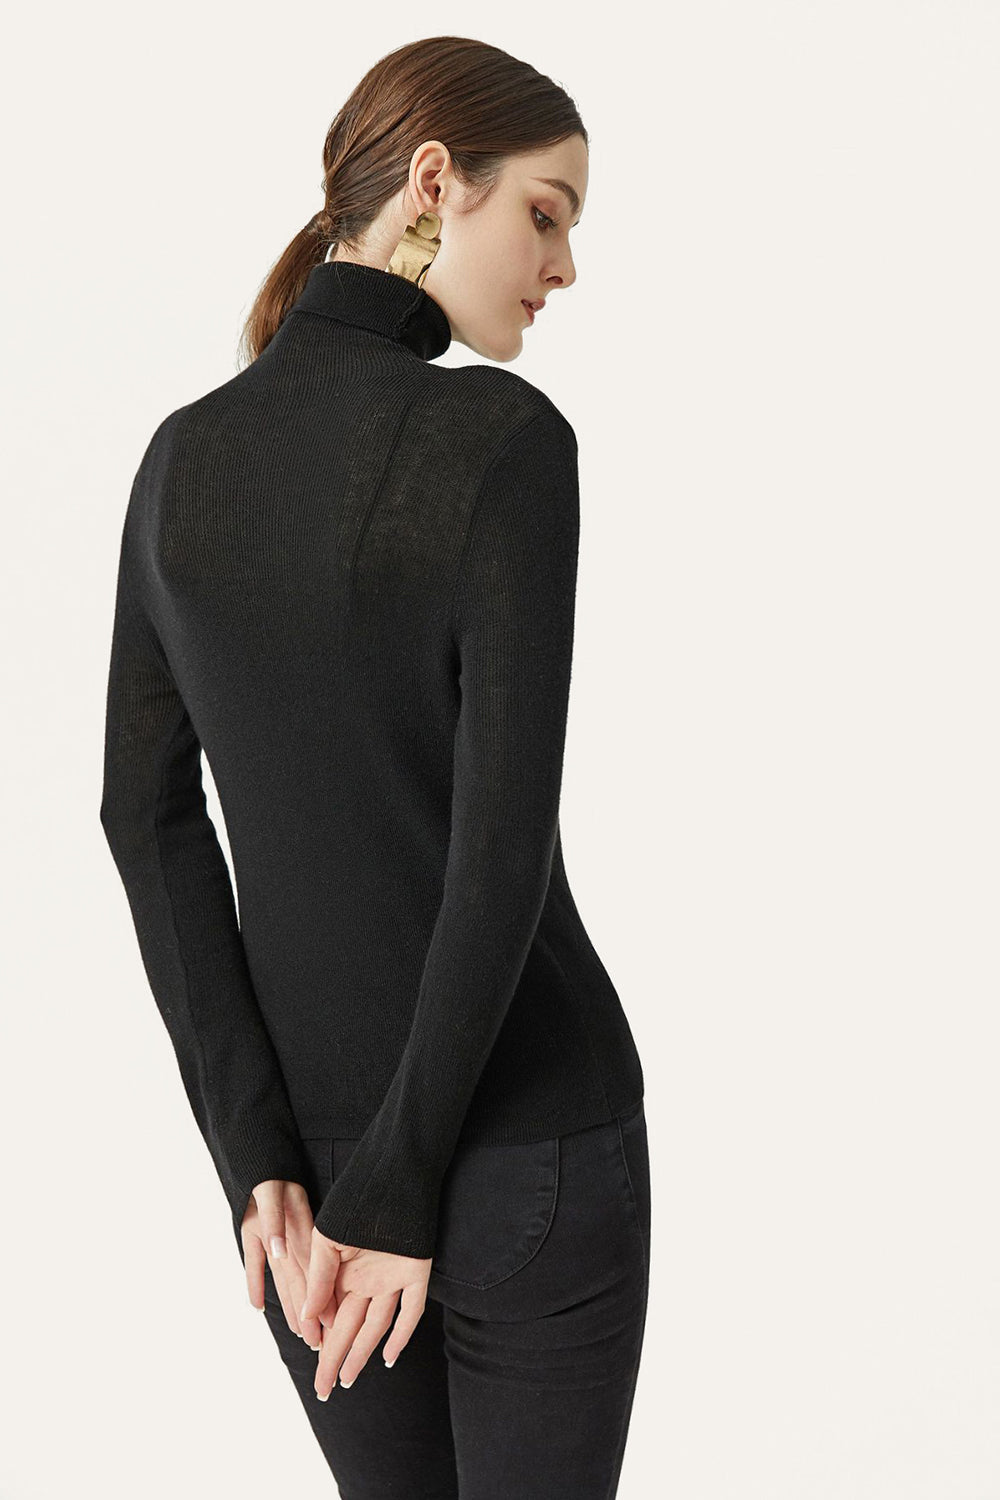 One Size Black Turtleneck Knitted Sweater